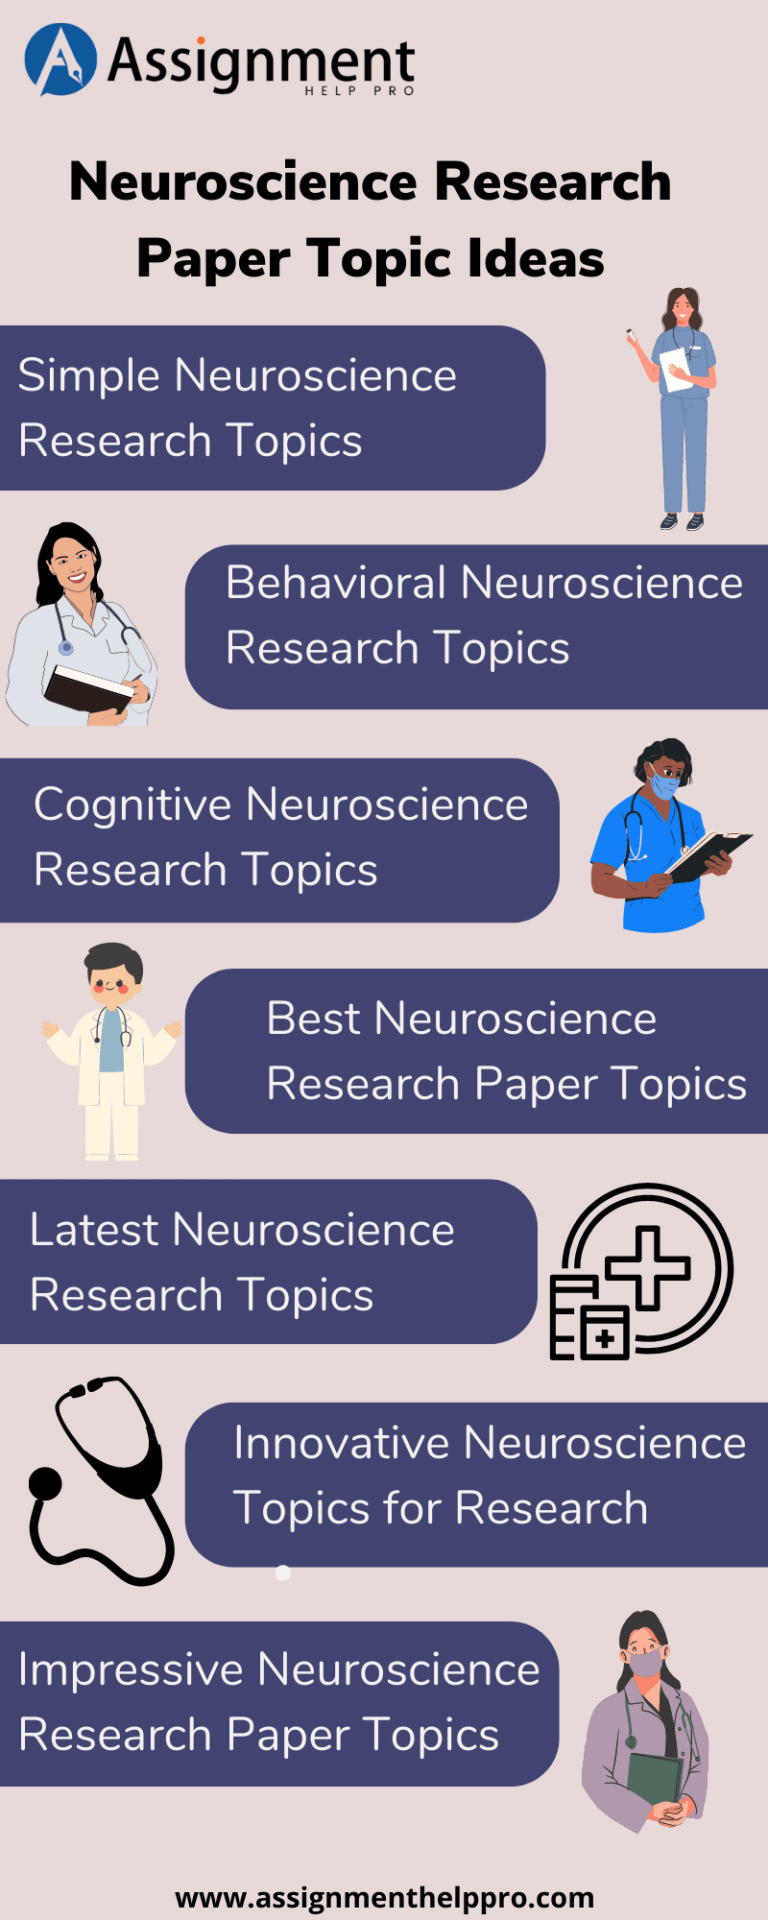 theoretical research topics neuroscience